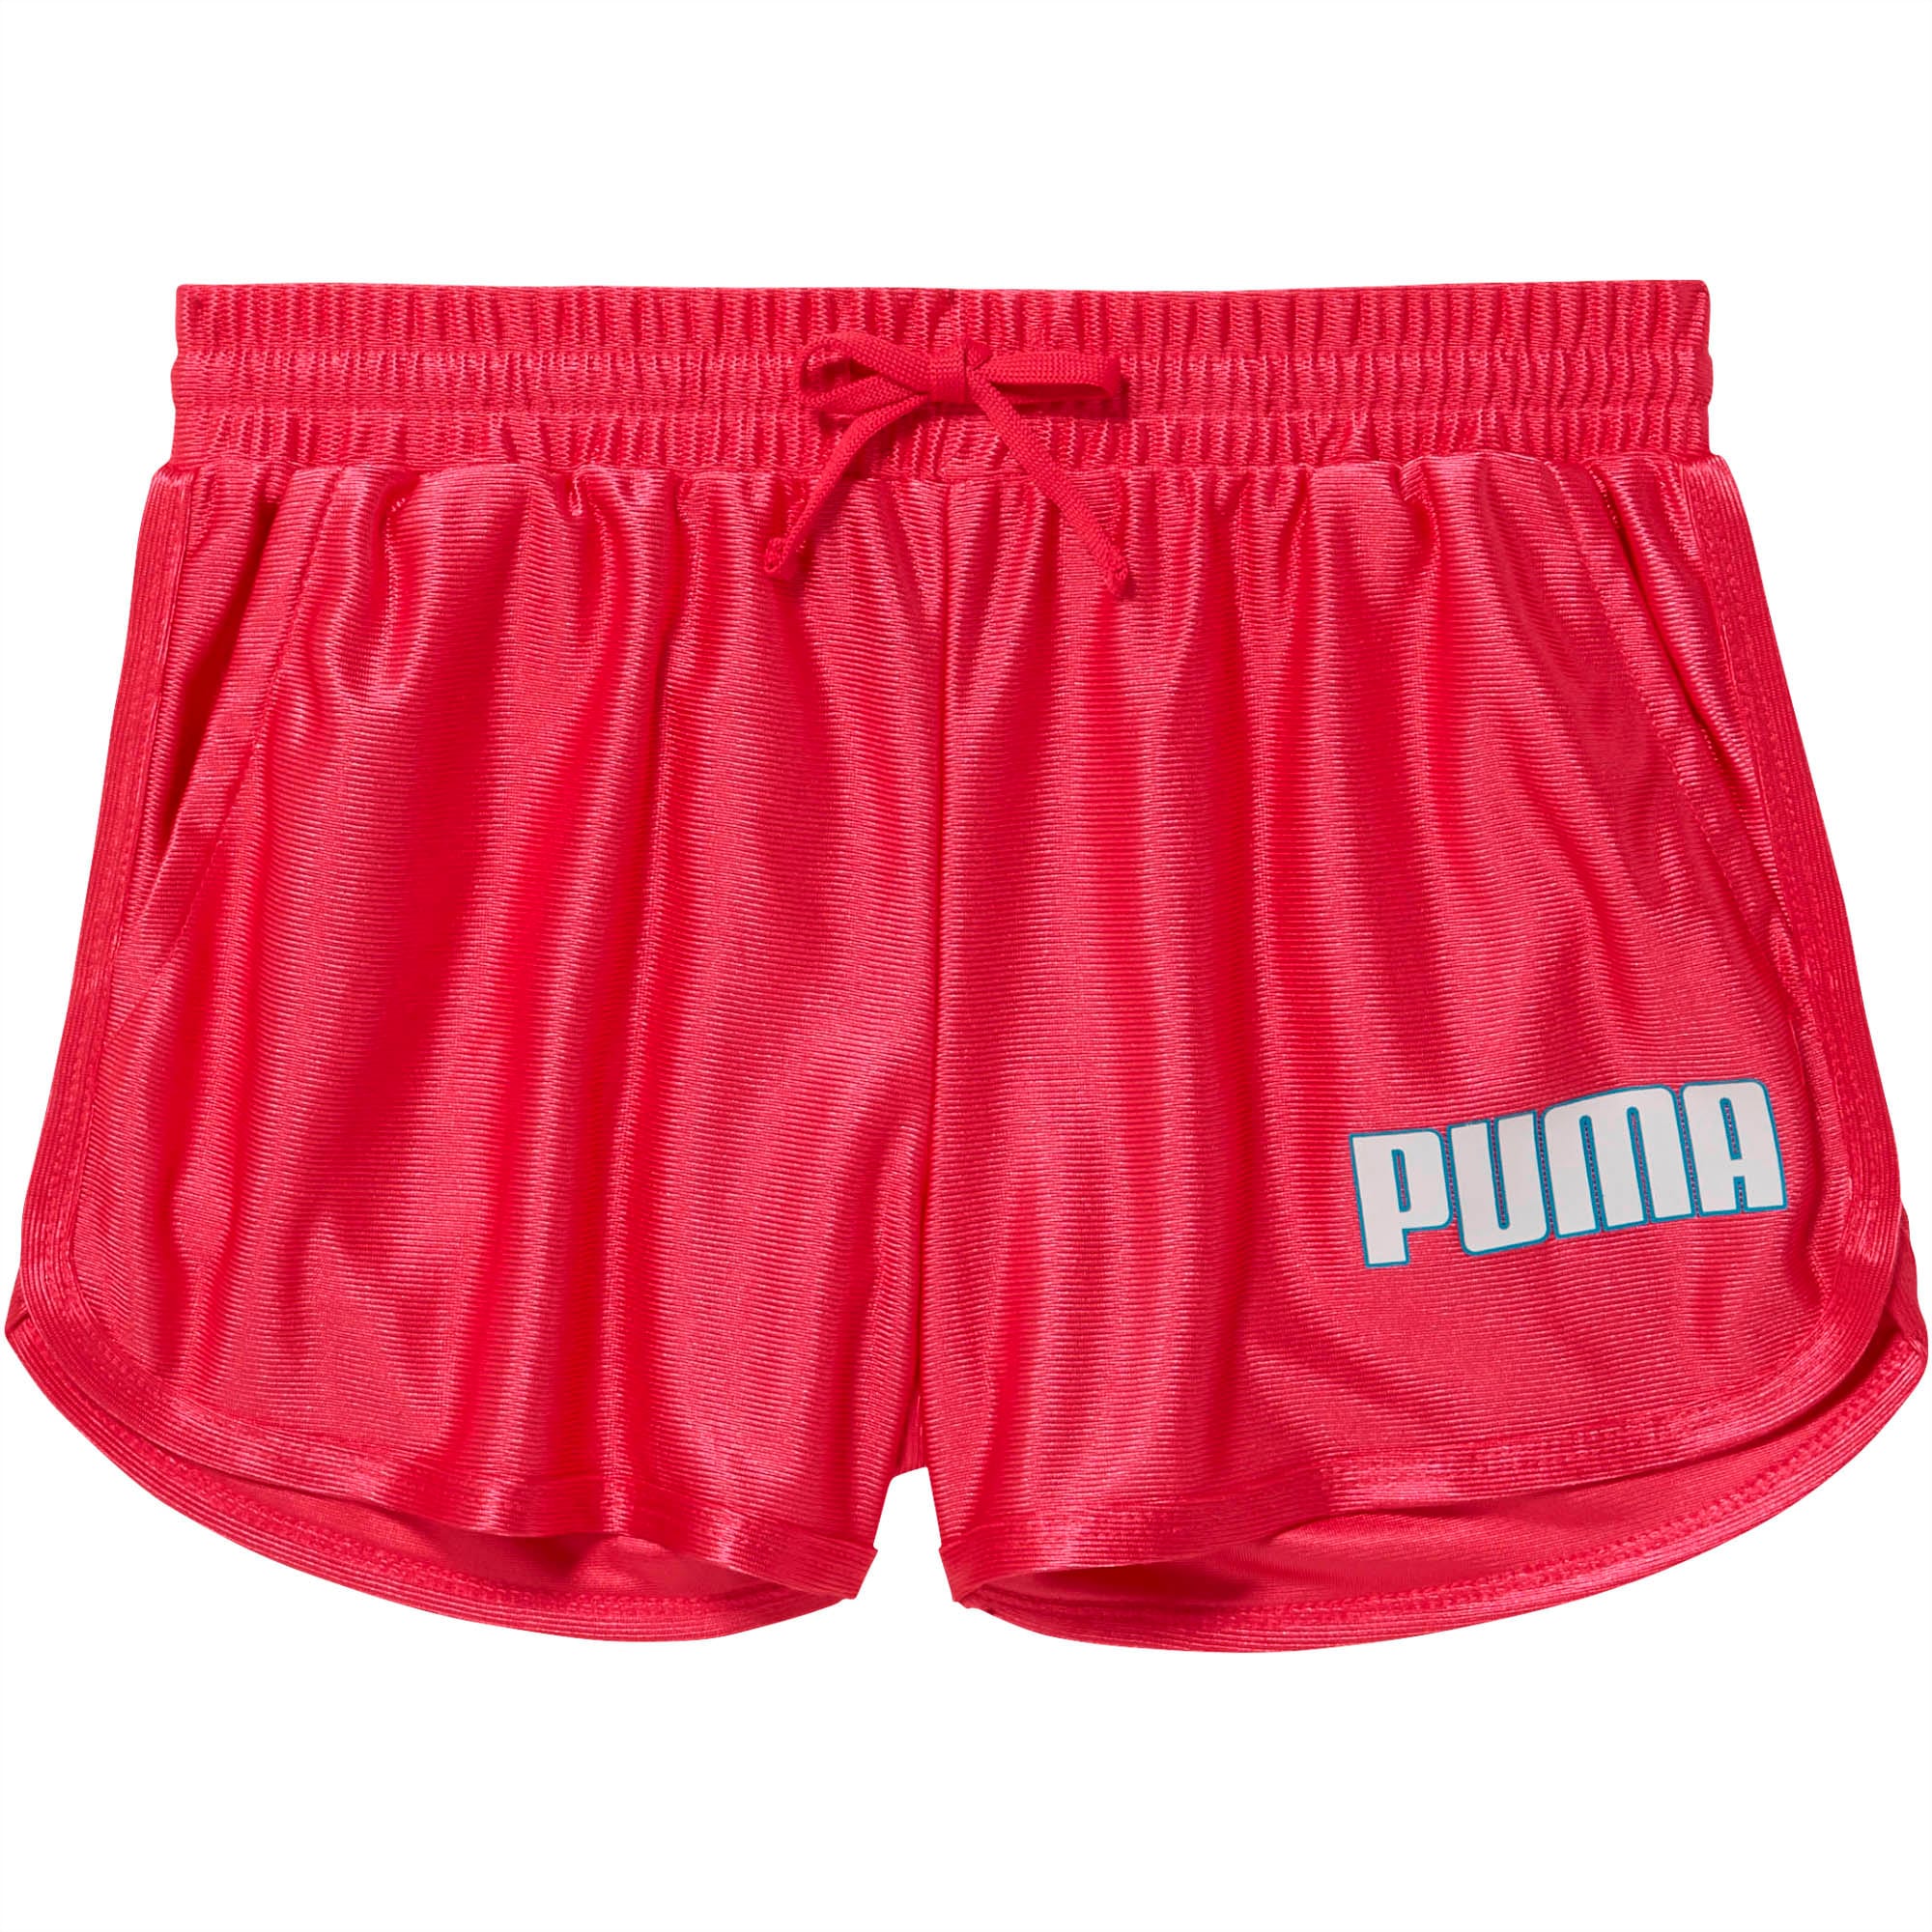 Red dazzle shorts